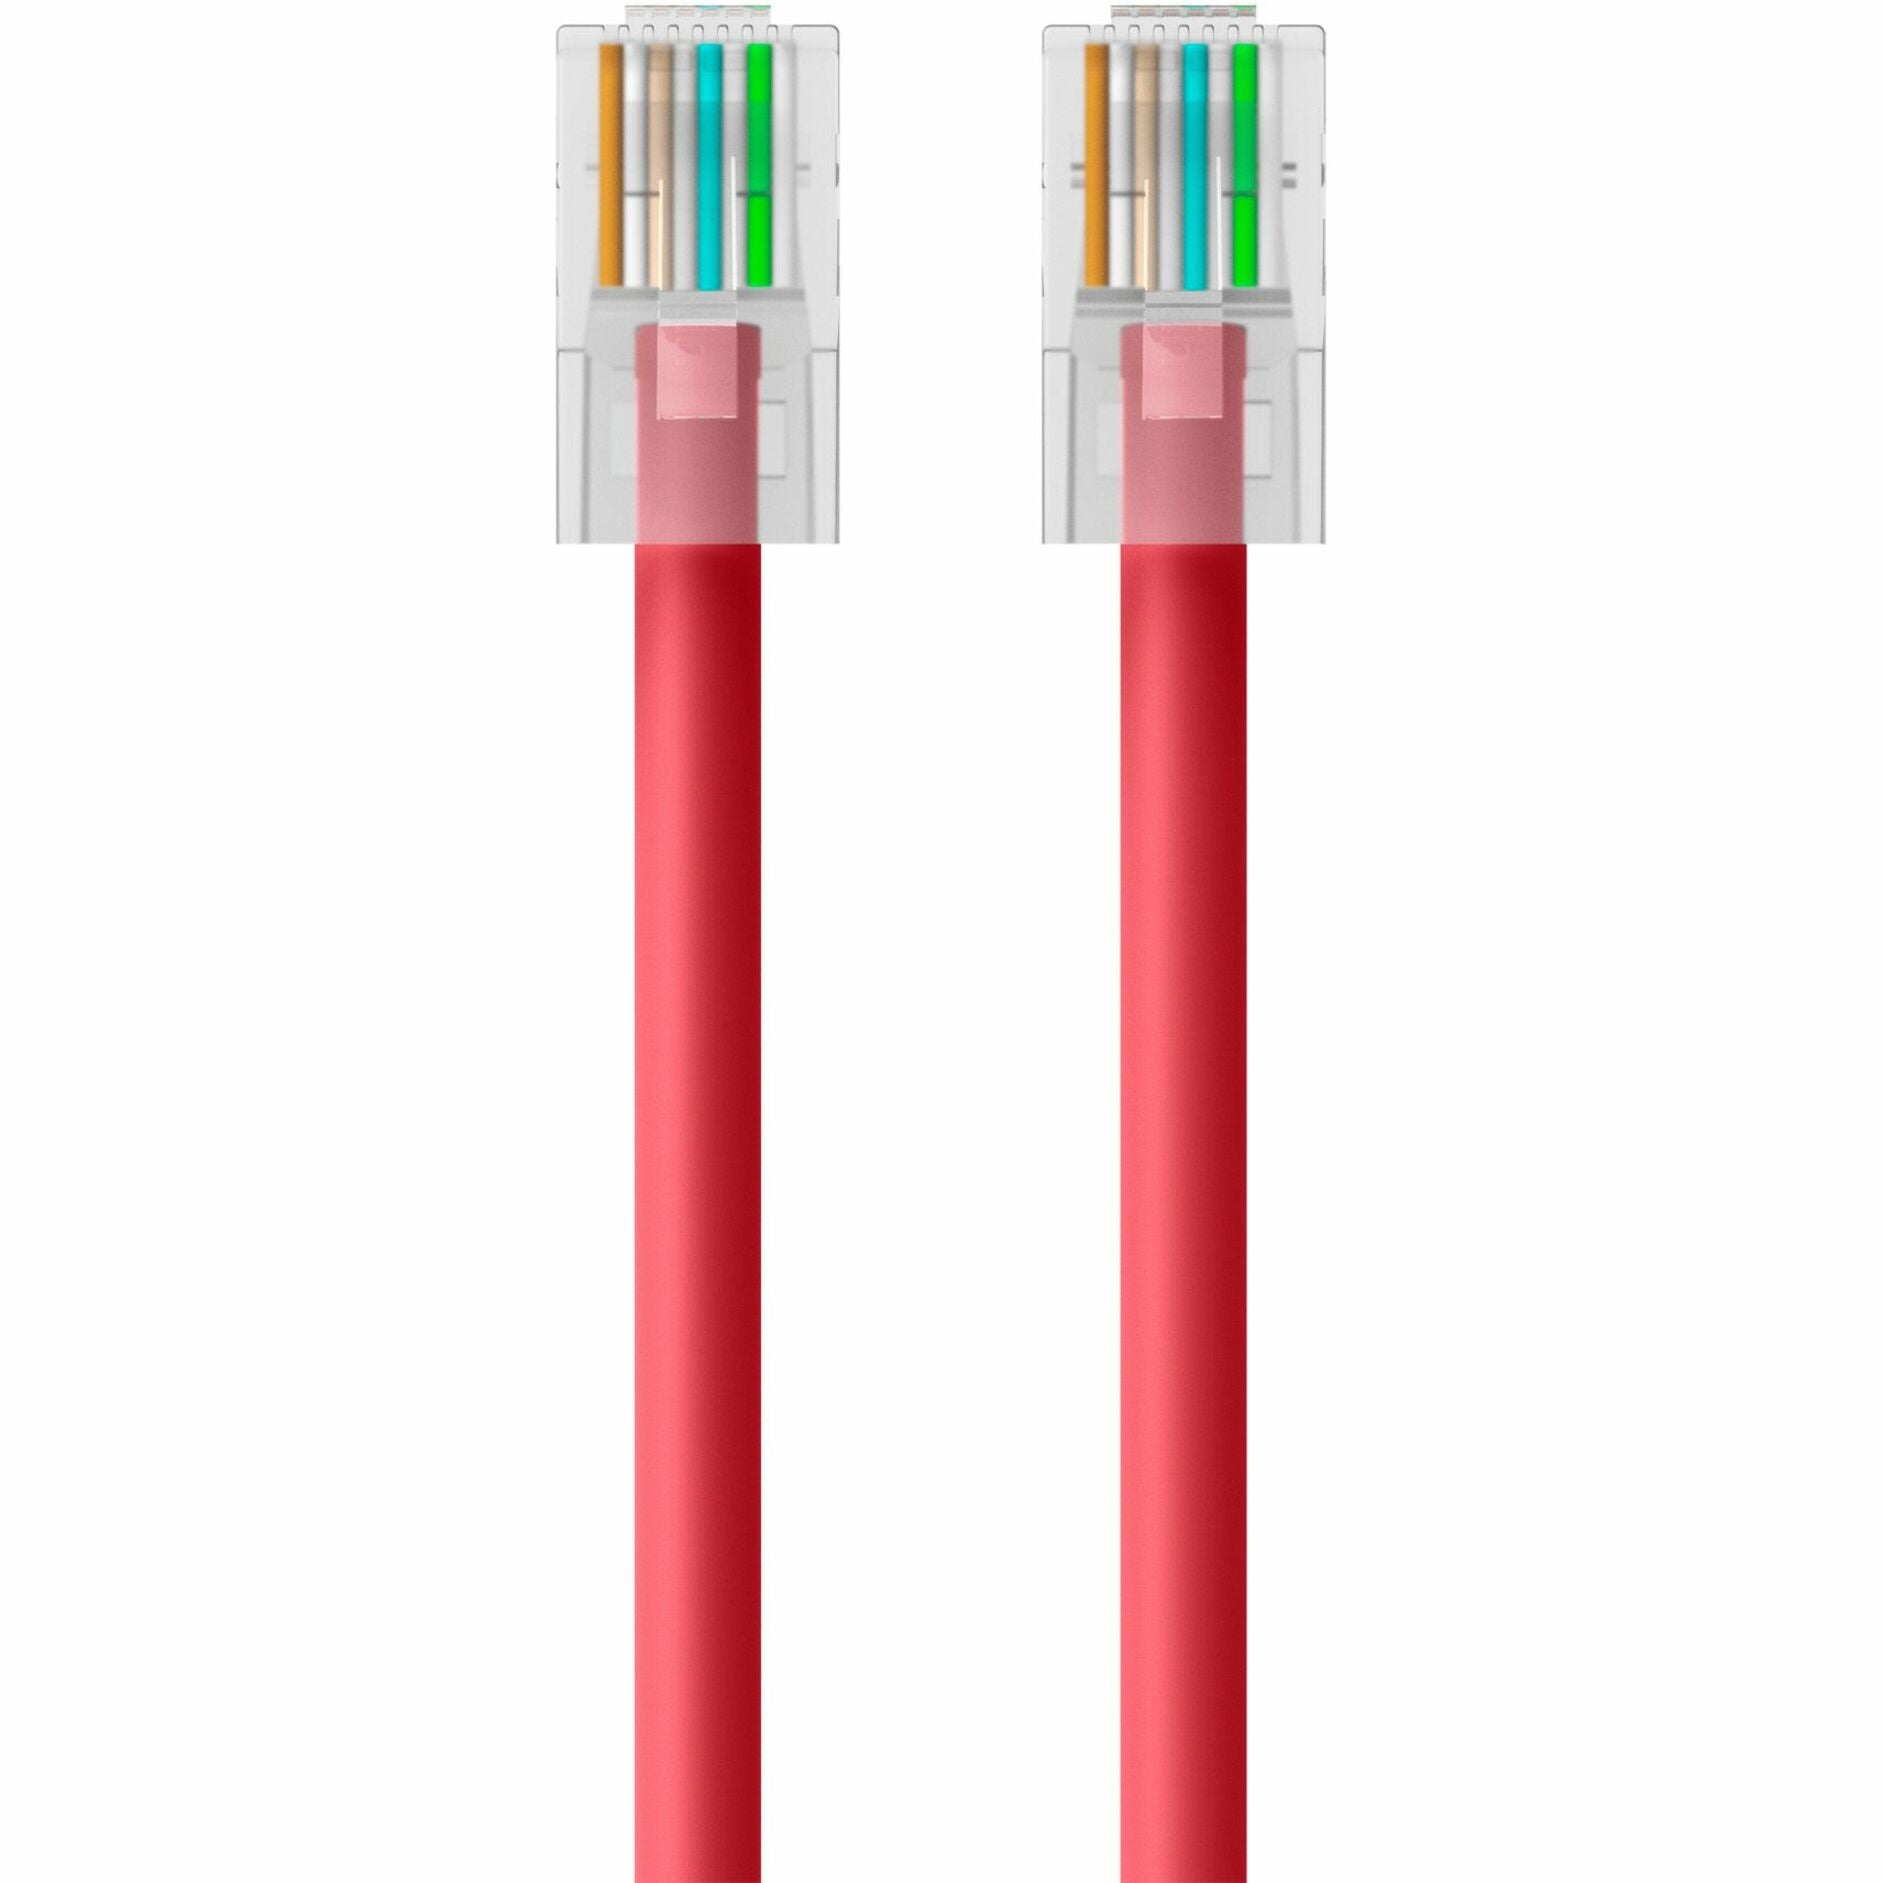 Belkin A3L791-12-RED RJ45 Category 5e Patch Cable, 12 ft, PowerSum Tested